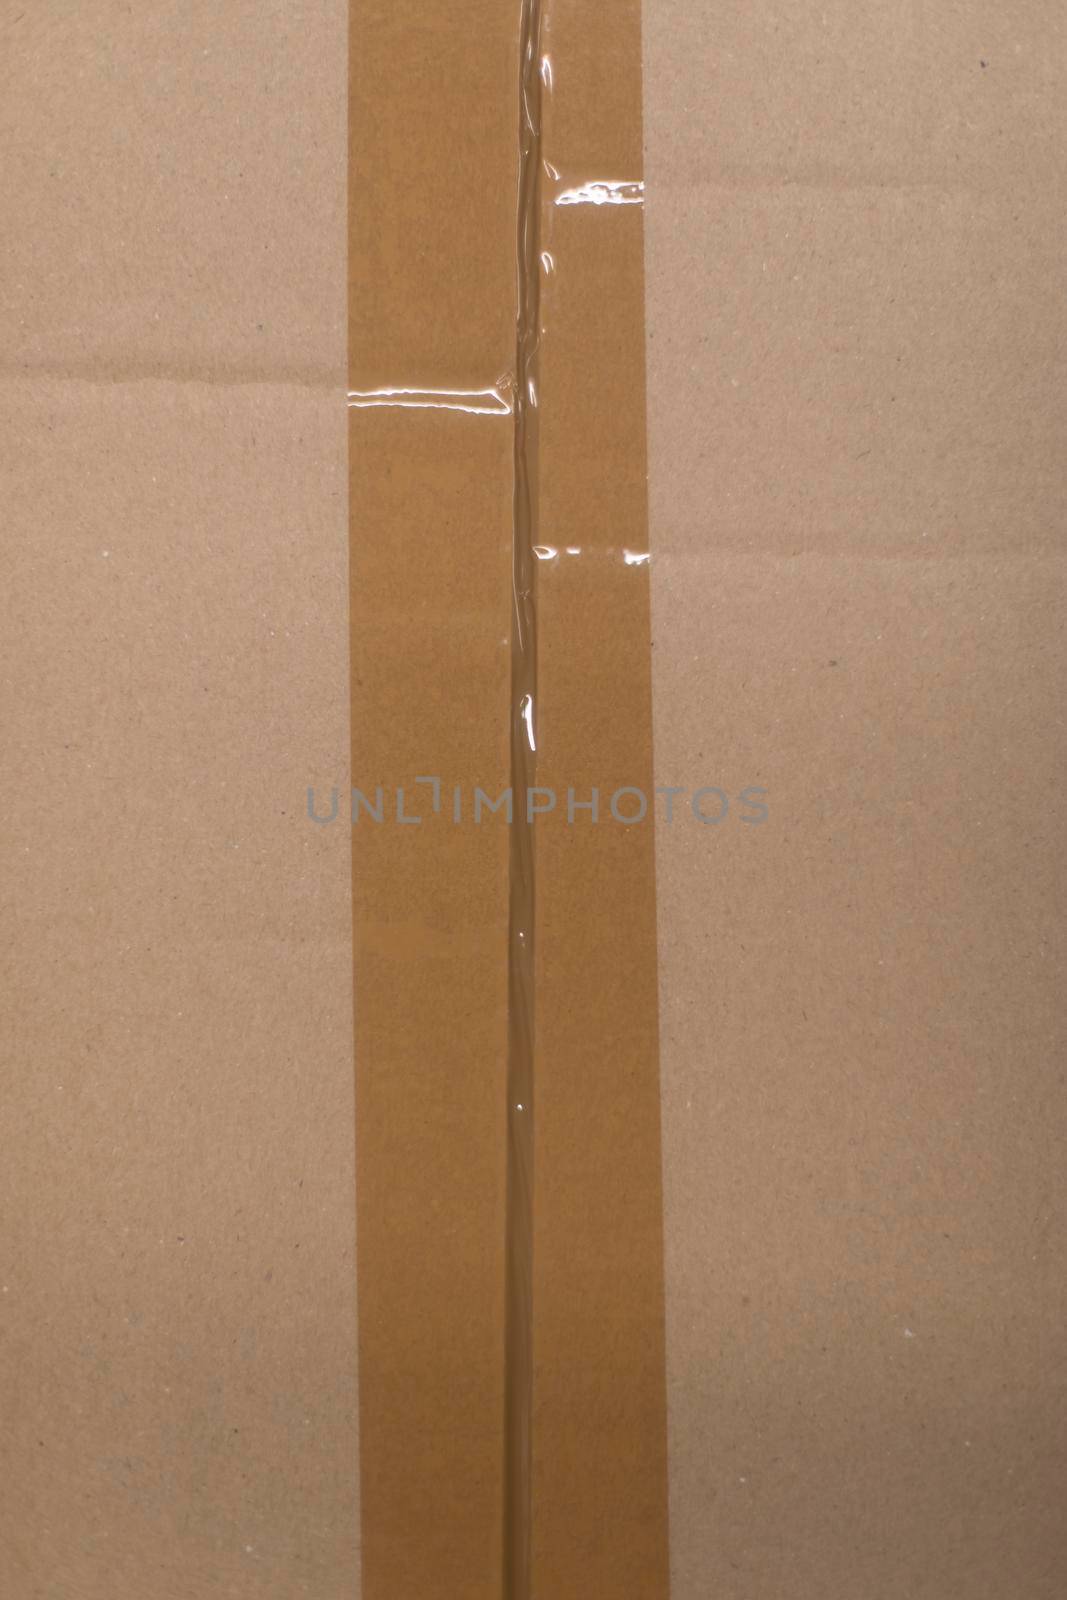 Cardboard box is taped with adhesive tape. Packing of goods. Texture paper and adhesive tape.